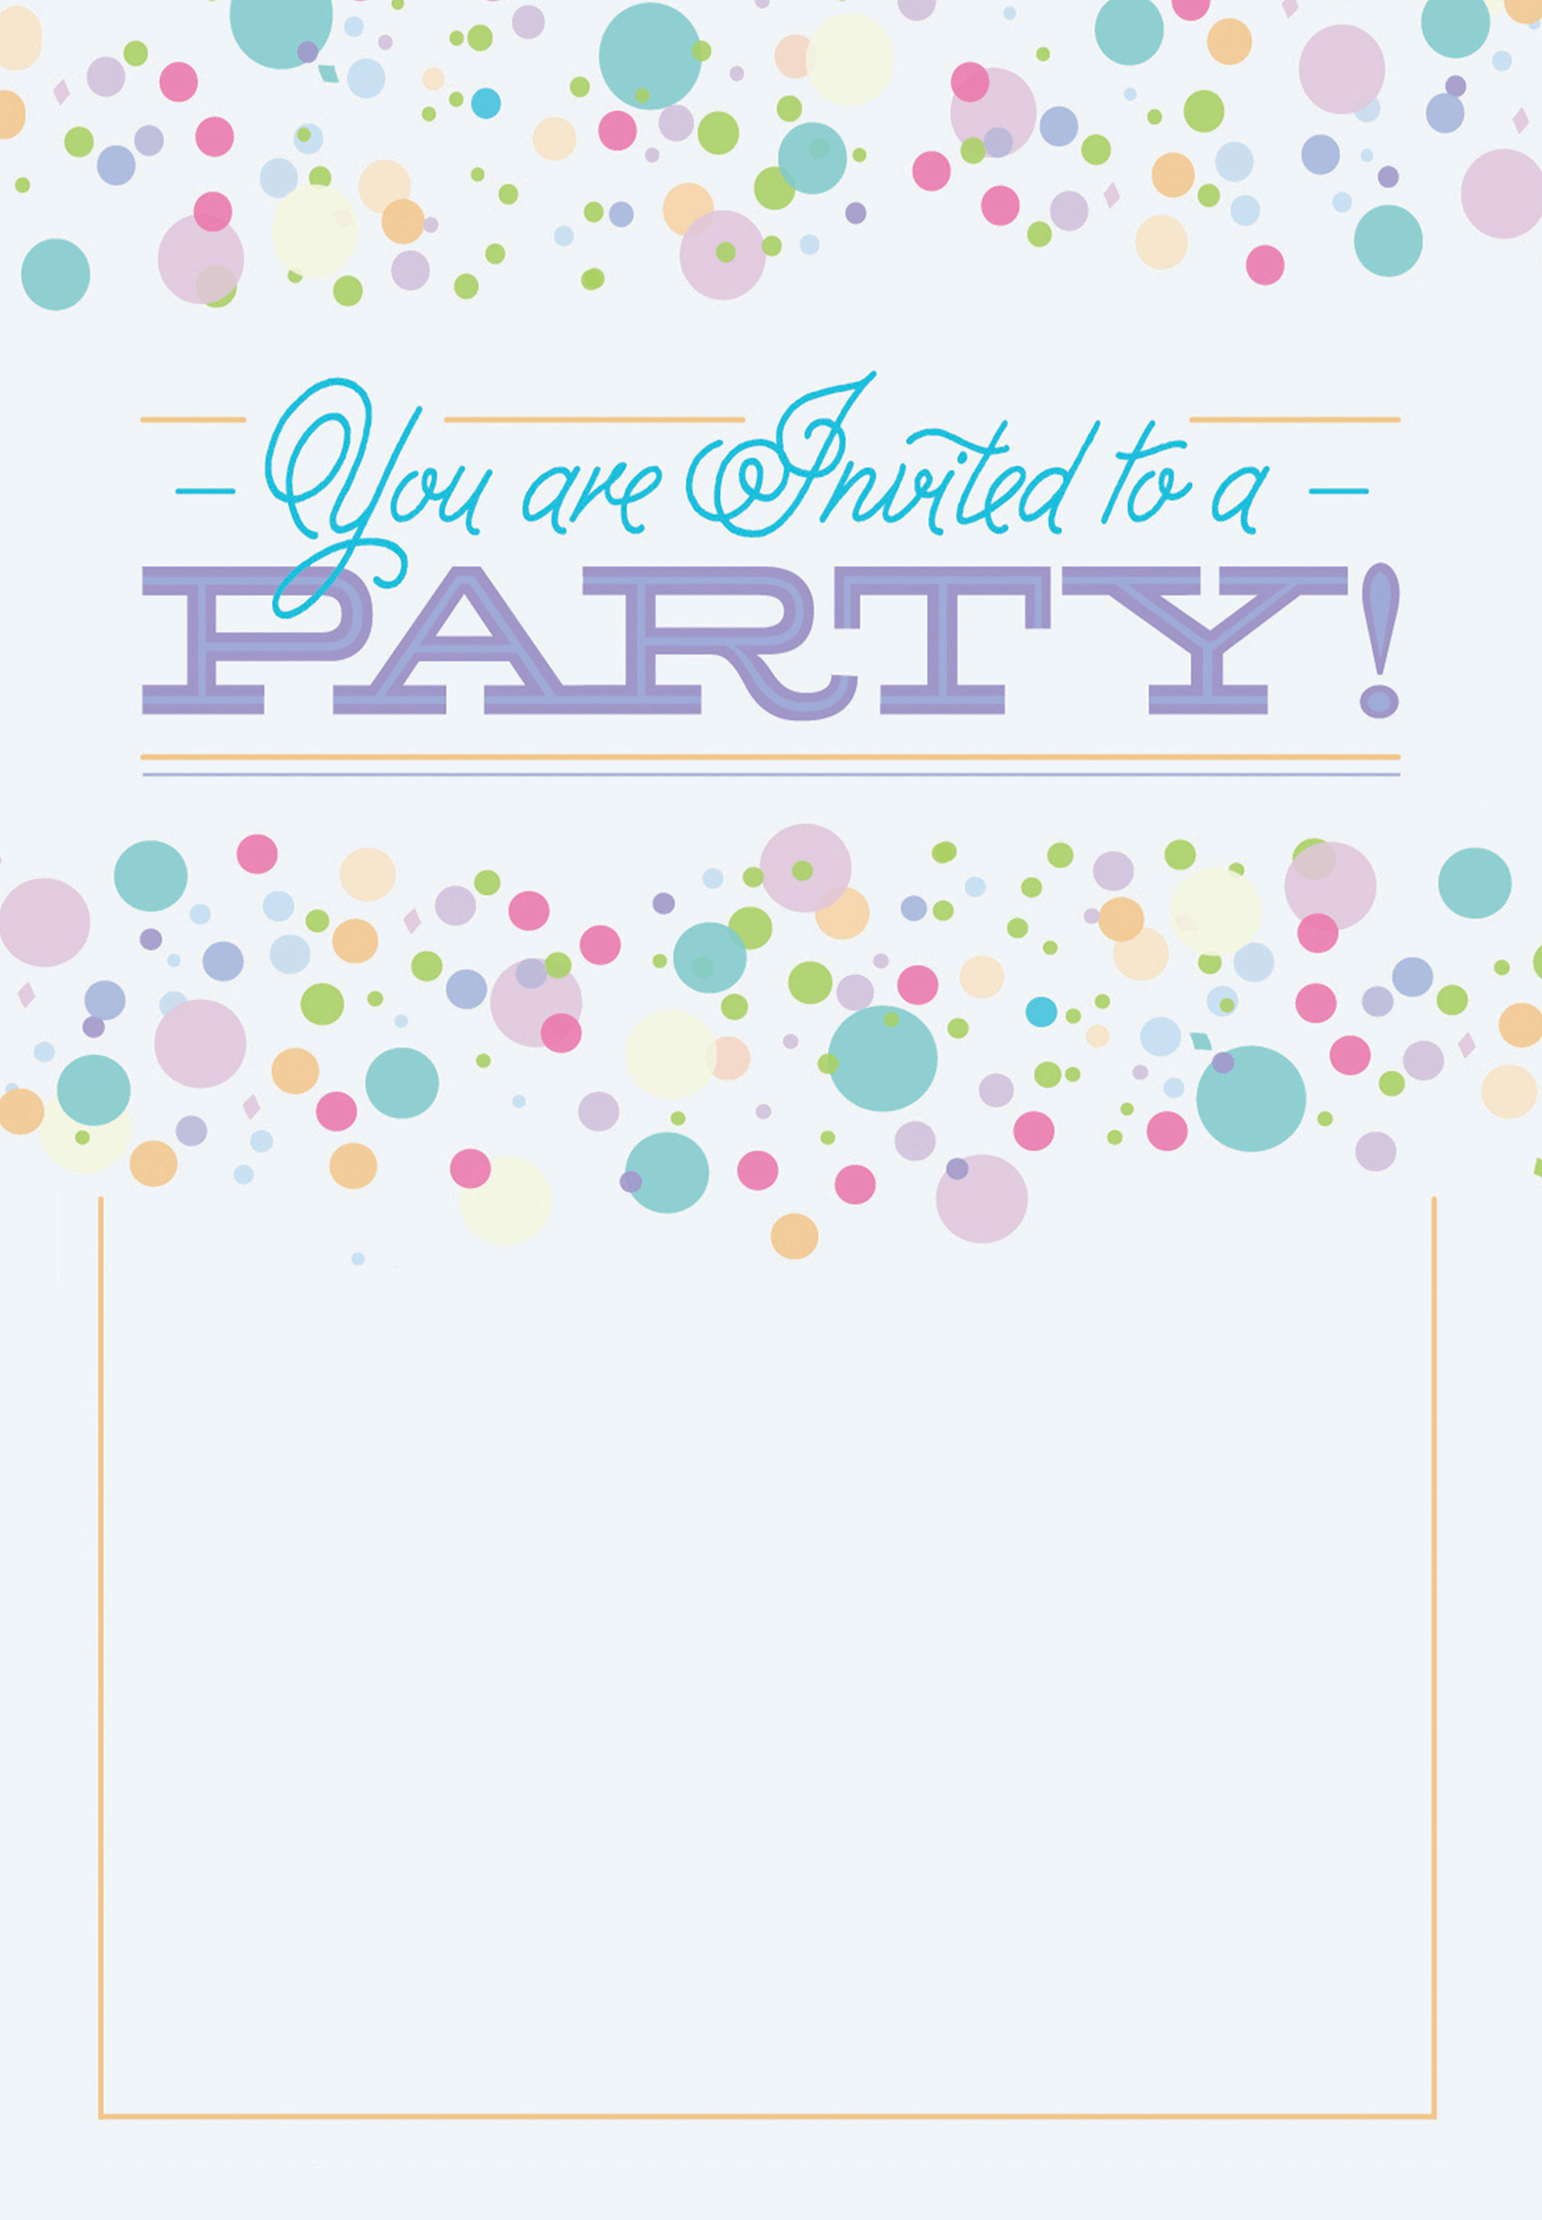 Polka Dots Free Printable Party Invitation Template Greetings within sizing 1542 X 2220